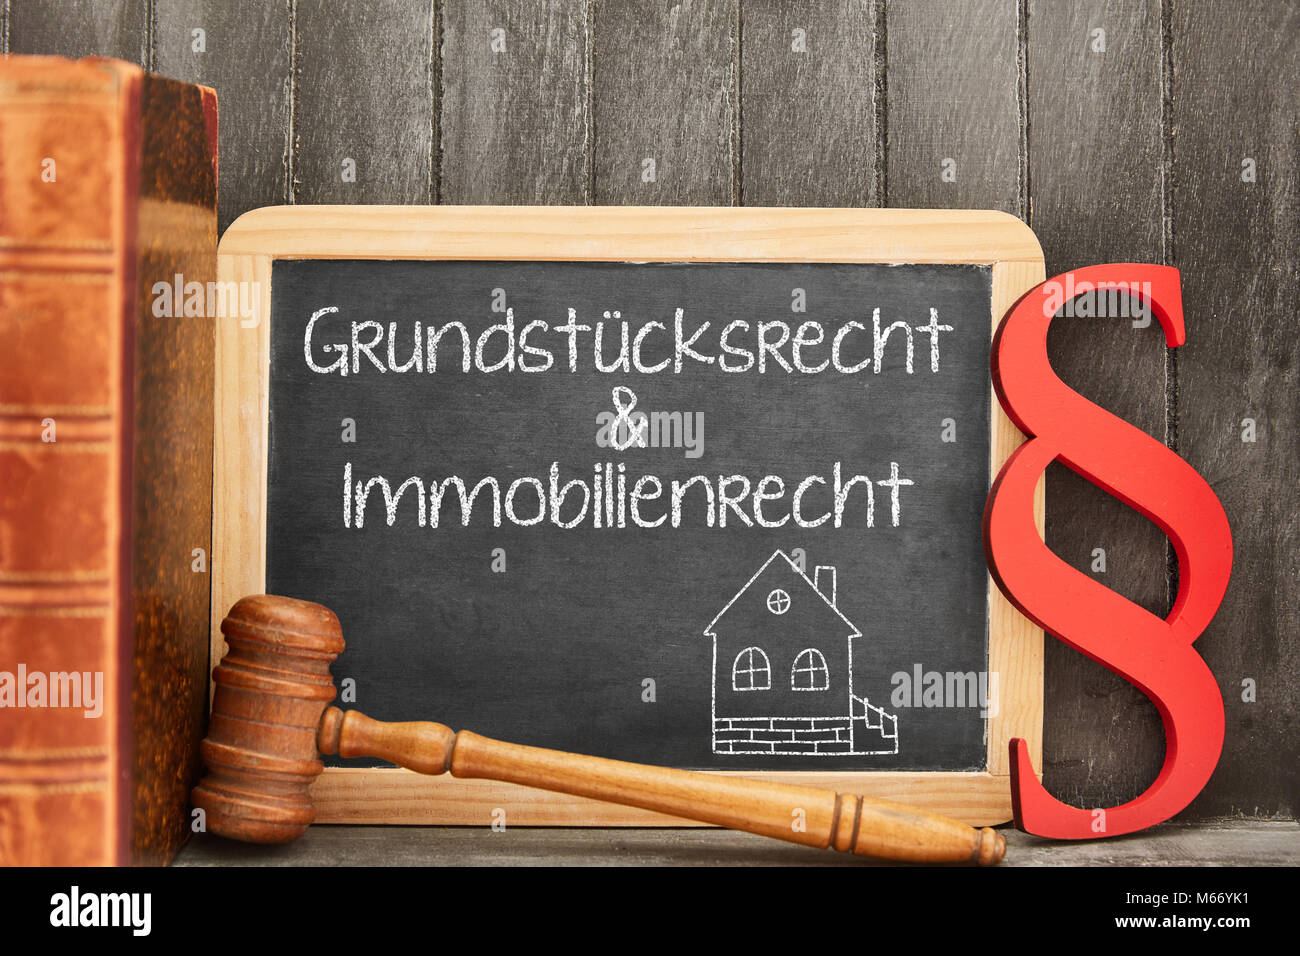 German words Grundstuecksrecht & Immobilienrecht (property law & real estate law) as a concept on a blackboard Stock Photo